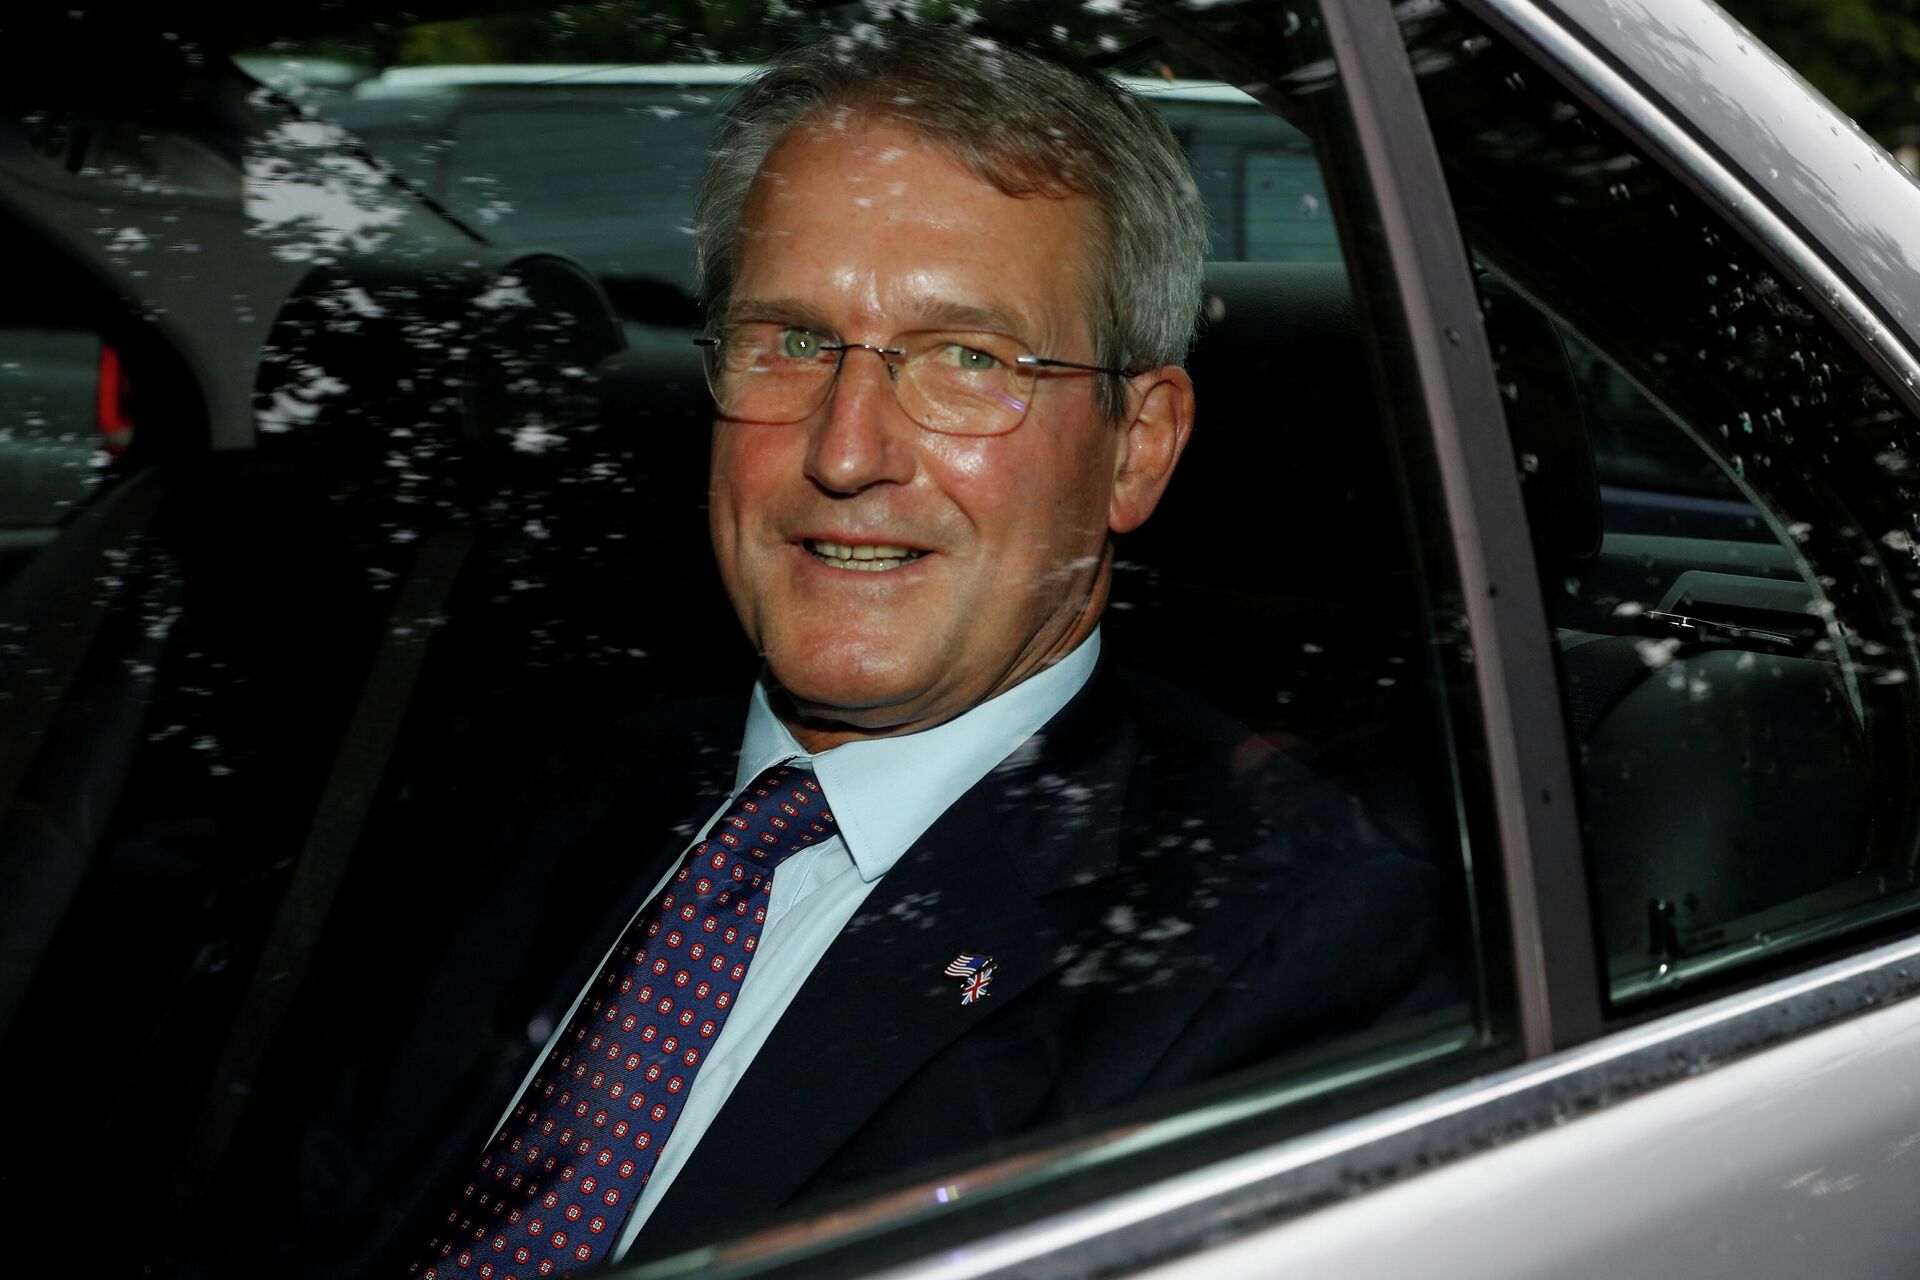 FILE PHOTO: Owen Paterson leaves Winfield House during U.S. President Donald Trump's state visit in London, - Sputnik International, 1920, 09.11.2021